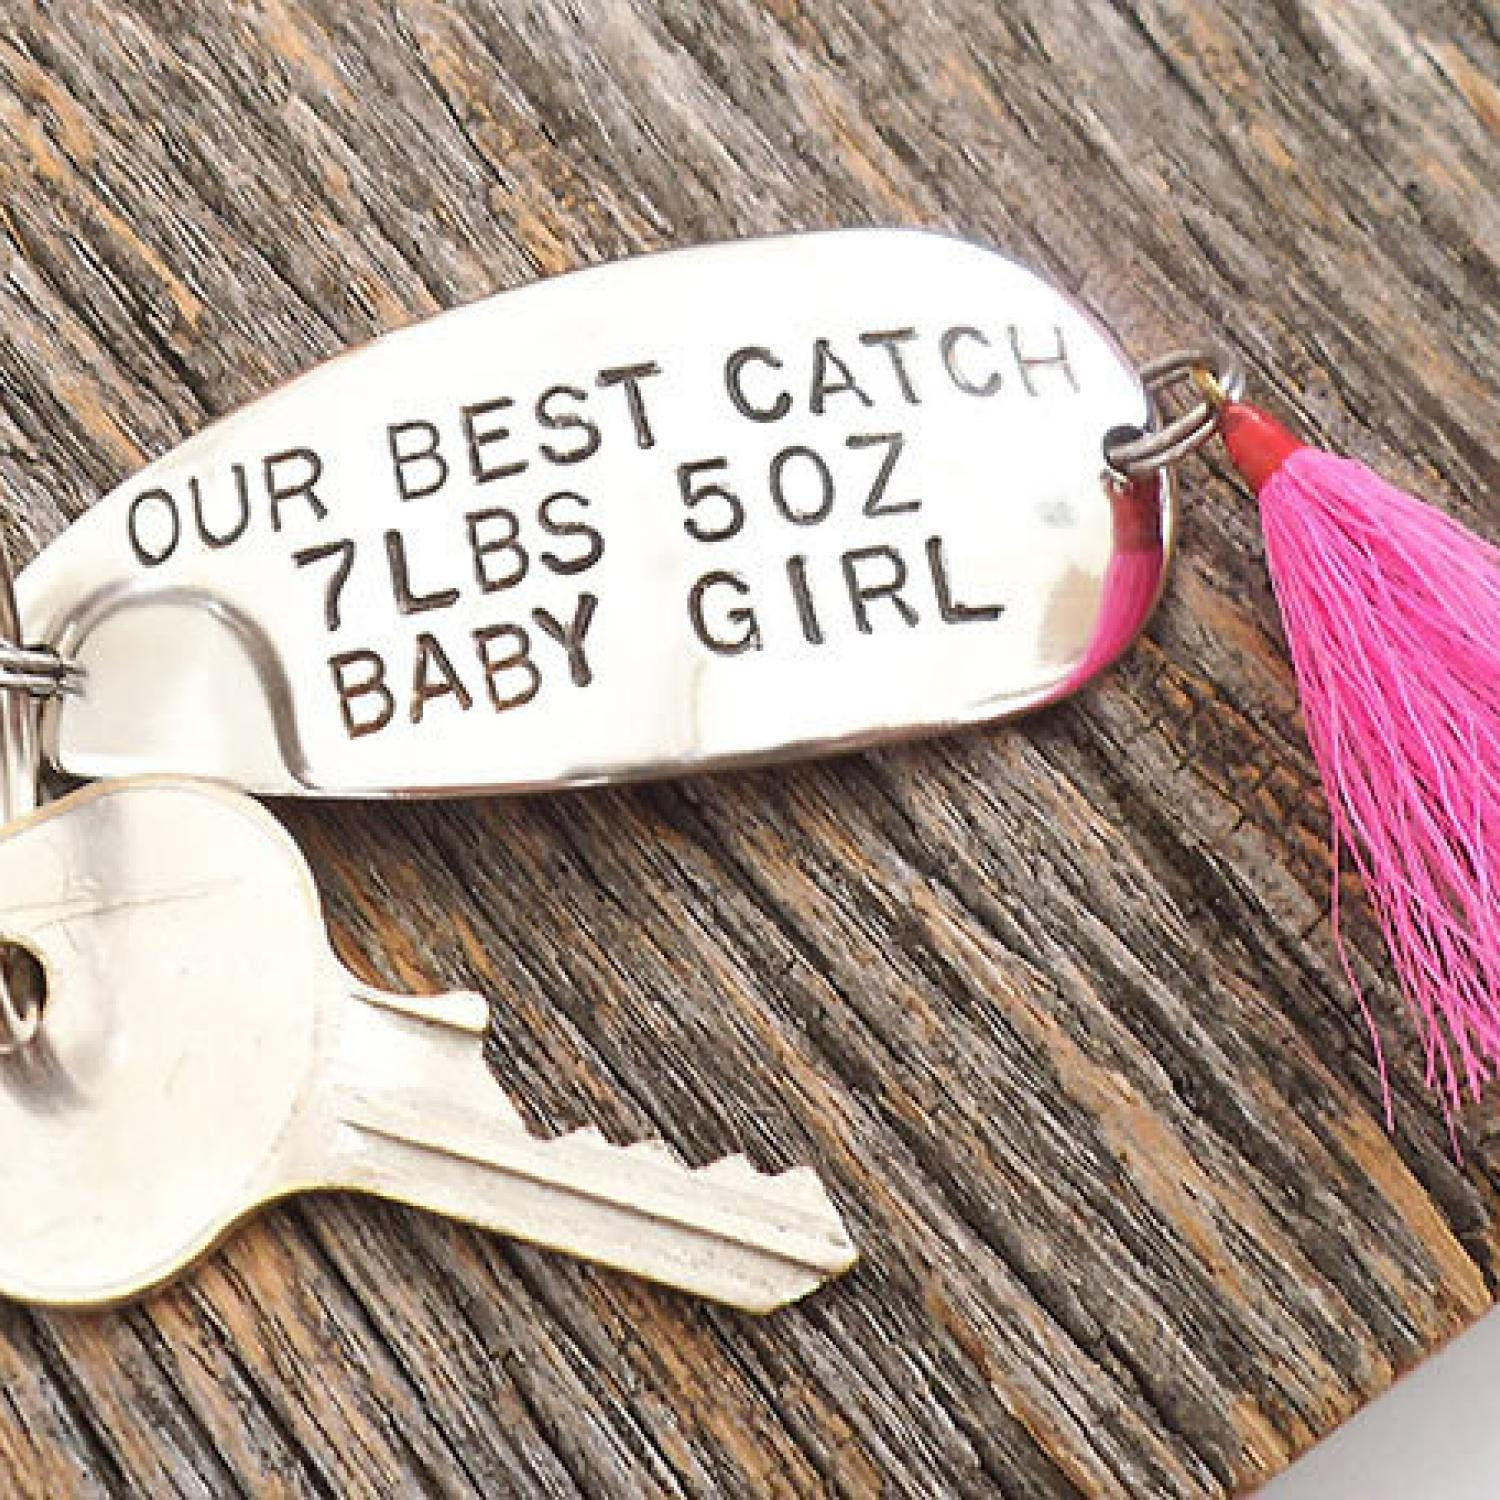 Gift Ideas For Dad From Baby Girl
 10 Precious Father s Day Gift Ideas from a New Baby